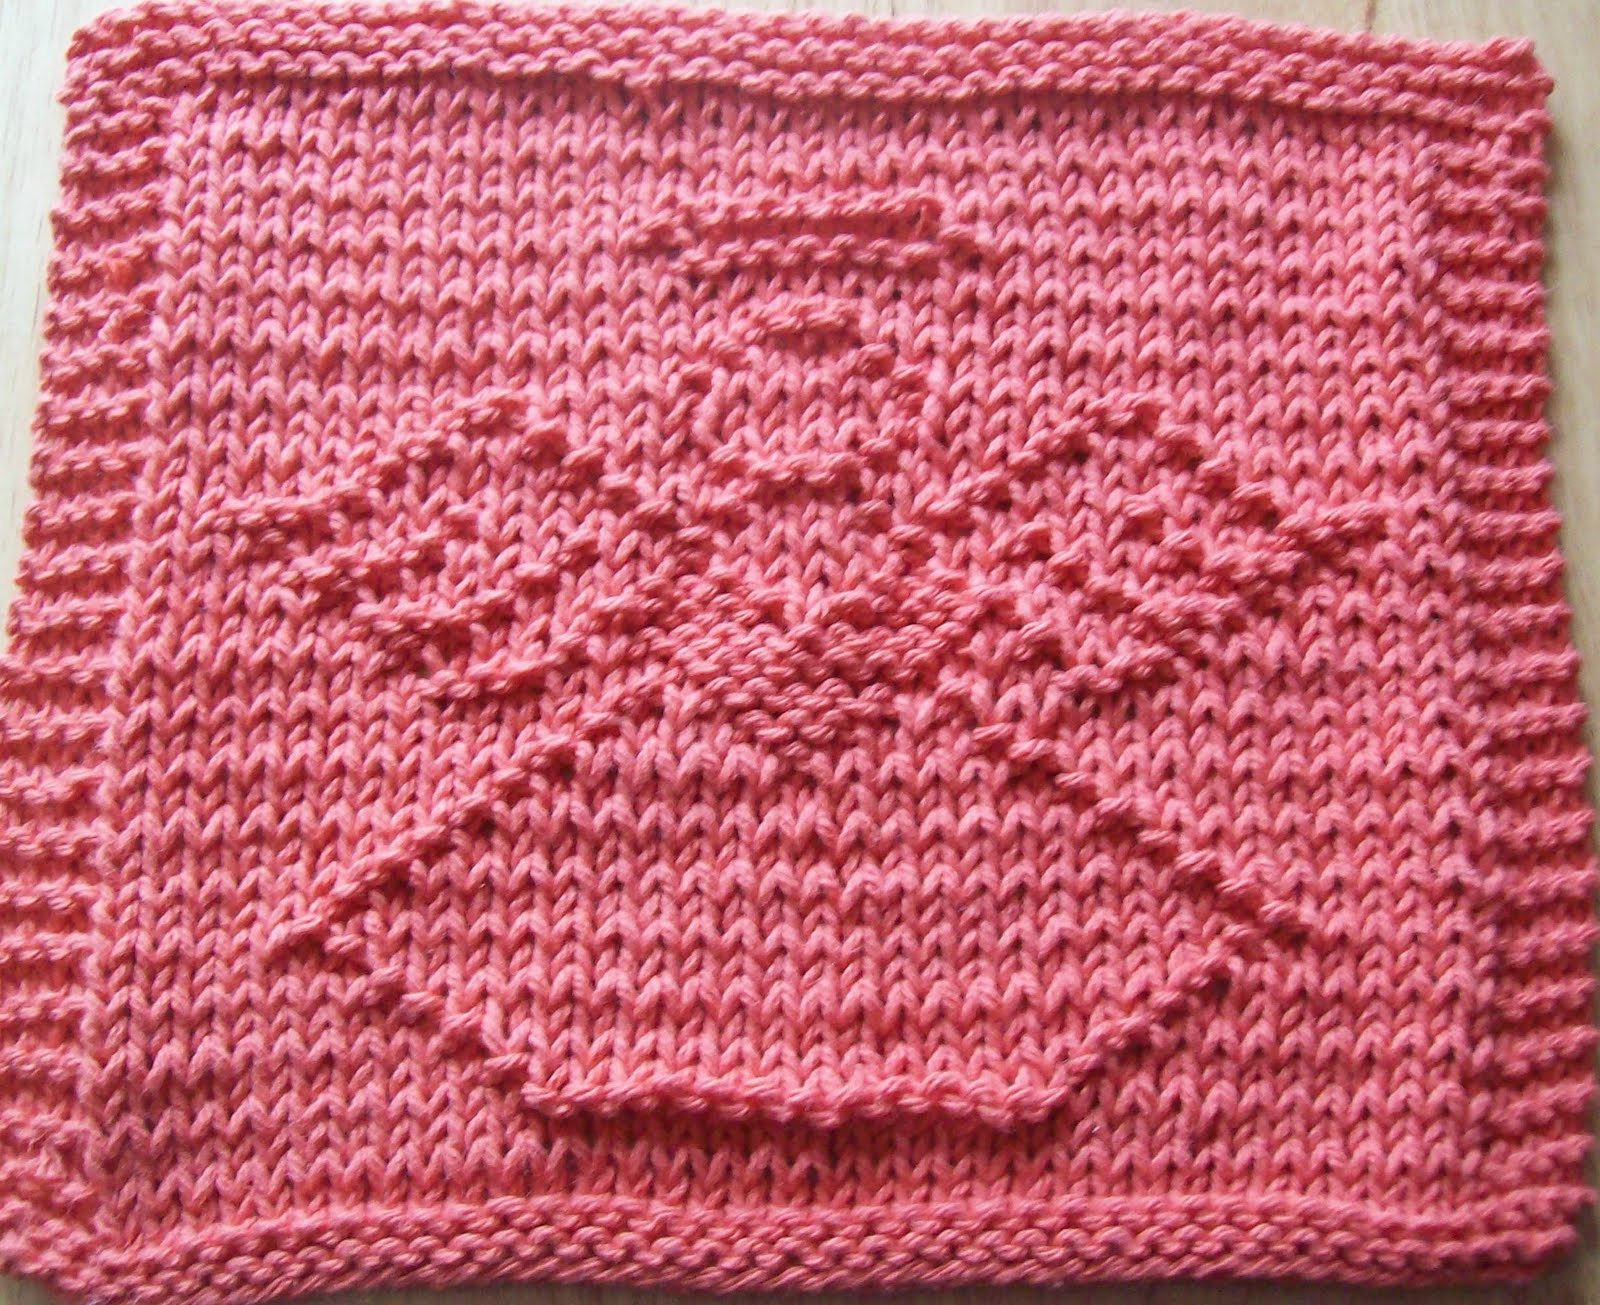 Free Knitted Dishcloth Pattern Digknitty Designs Angel With Heart Knit Dishcloth Pattern